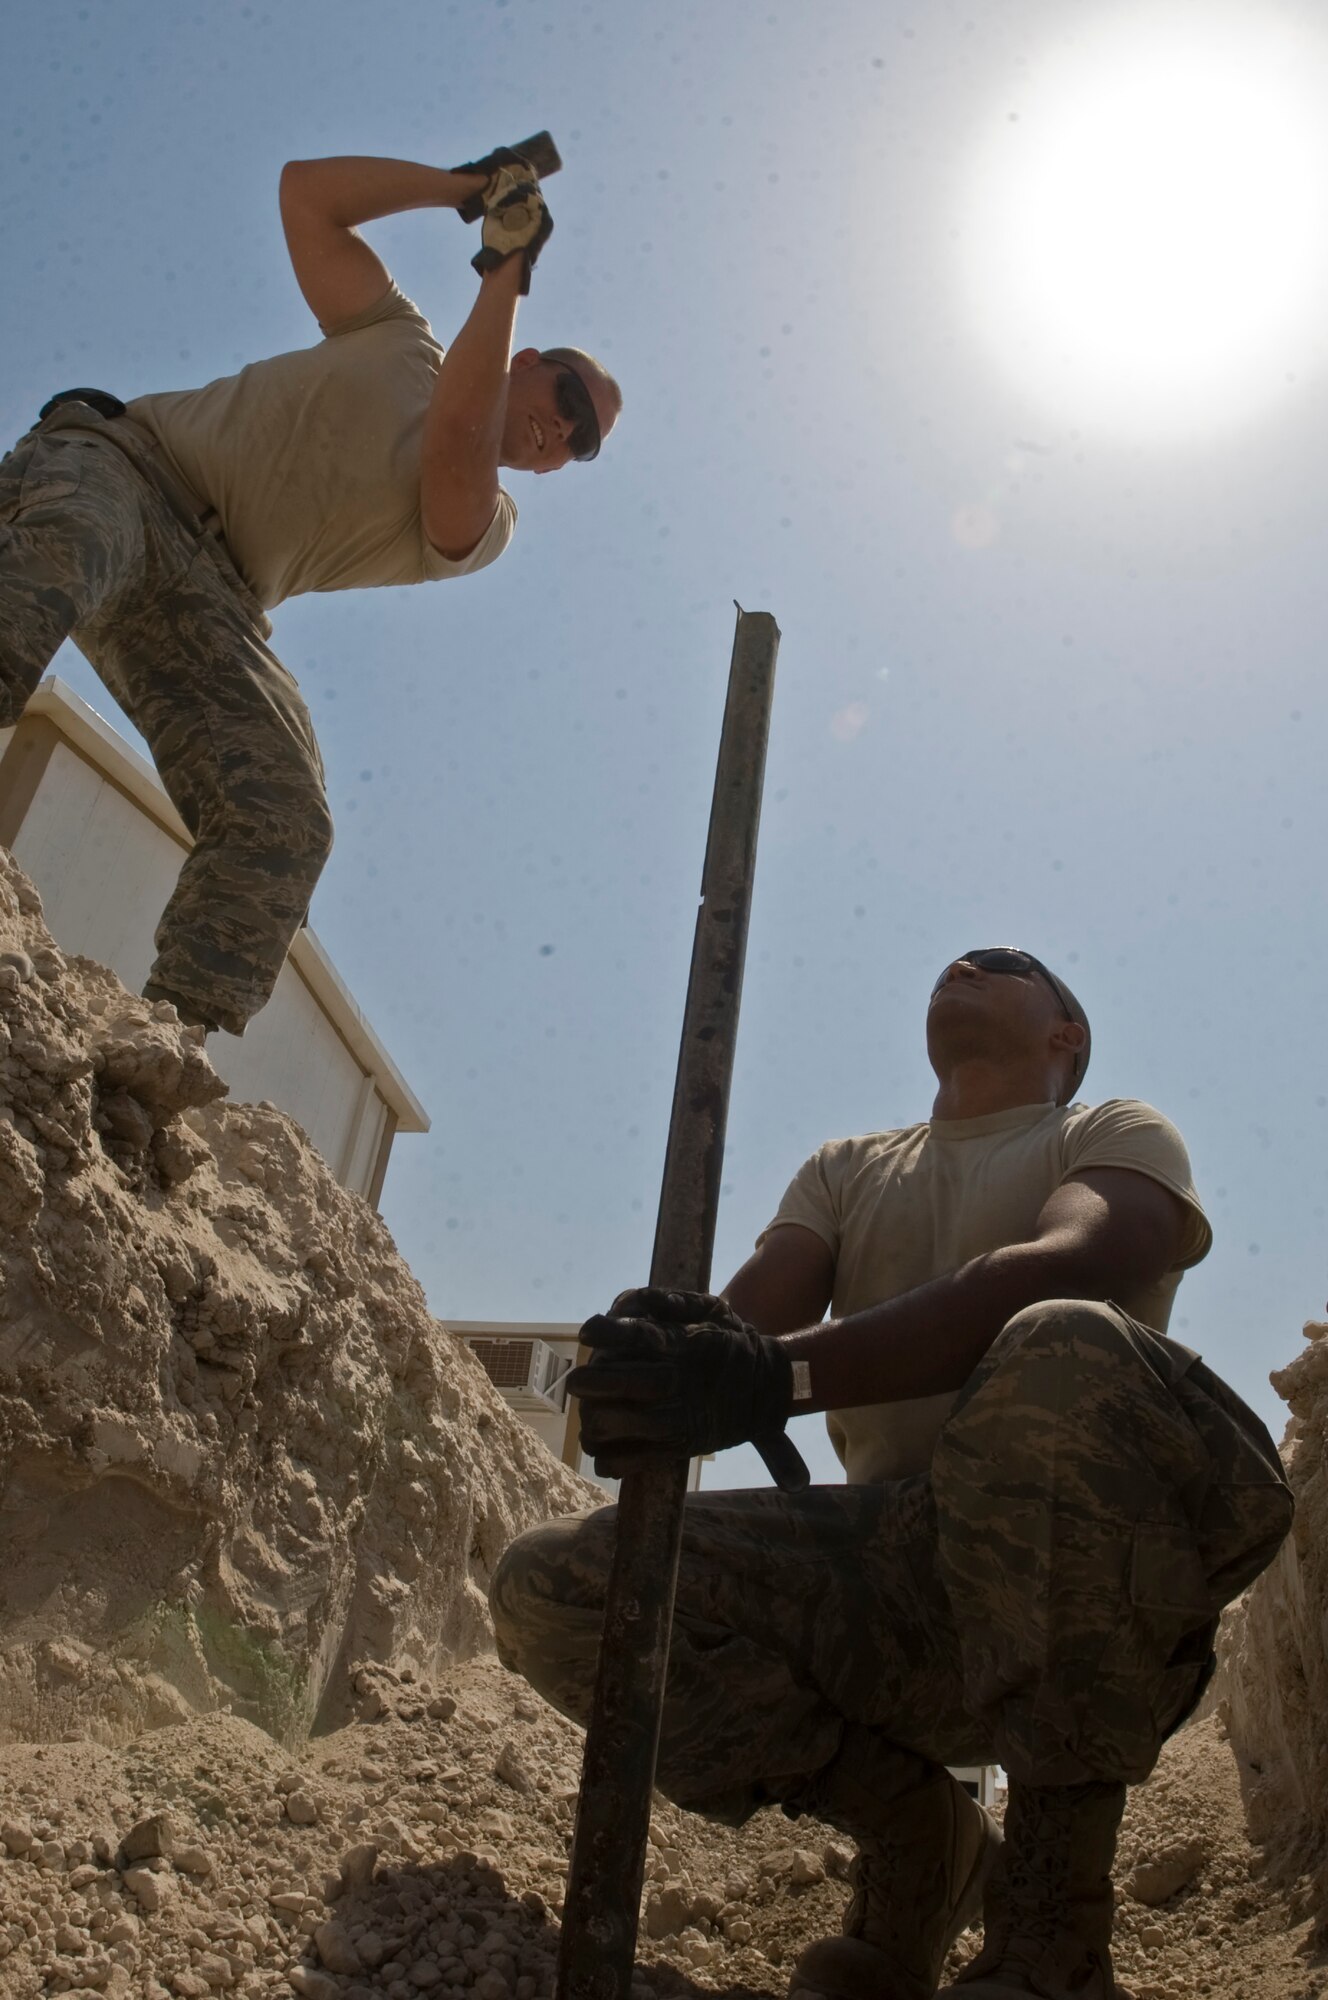 ALI BASE, Iraq -- Staff Sgt. Trevor Petersma and Airman 1st Class Aaron Weathers, 407th Expeditionary Civil Engineer Squadron Utilities Shop, measure the distance between metal supports for water and sewage lines Aug. 15, 2008. In the transition from tents to trailers, the 407th ECES is rerouting the power supply along with laying water and sewage systems for latrines used by all Airmen here. Petersma is deployed from Malmstrom Air Force Base, Mont. Weathers is deployed from F.E. Warren AFB, Wyo.(U.S. Air Force photo/Airman 1st Class Christopher Griffin)